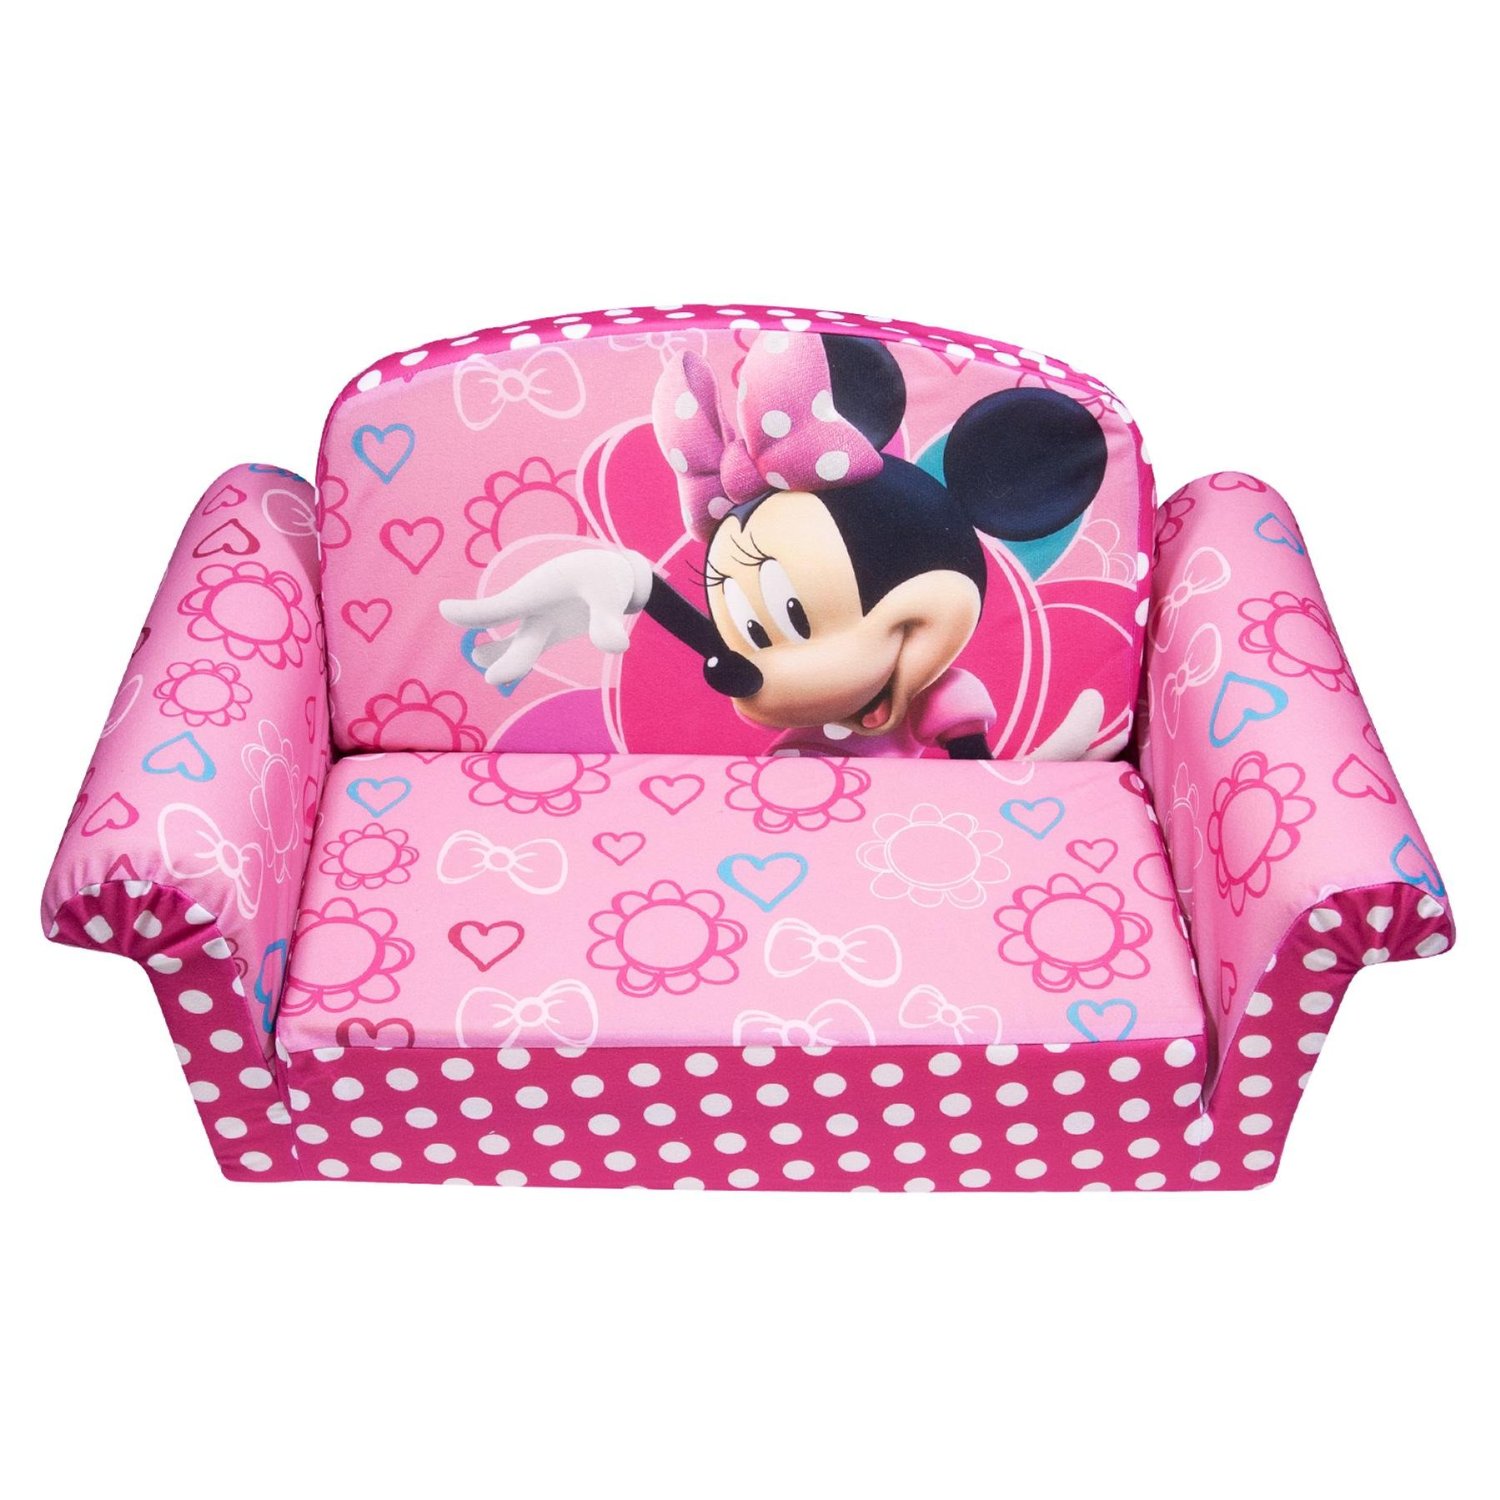 Minnie Mouse Chairs Fold Out Couches & Flip Sofas